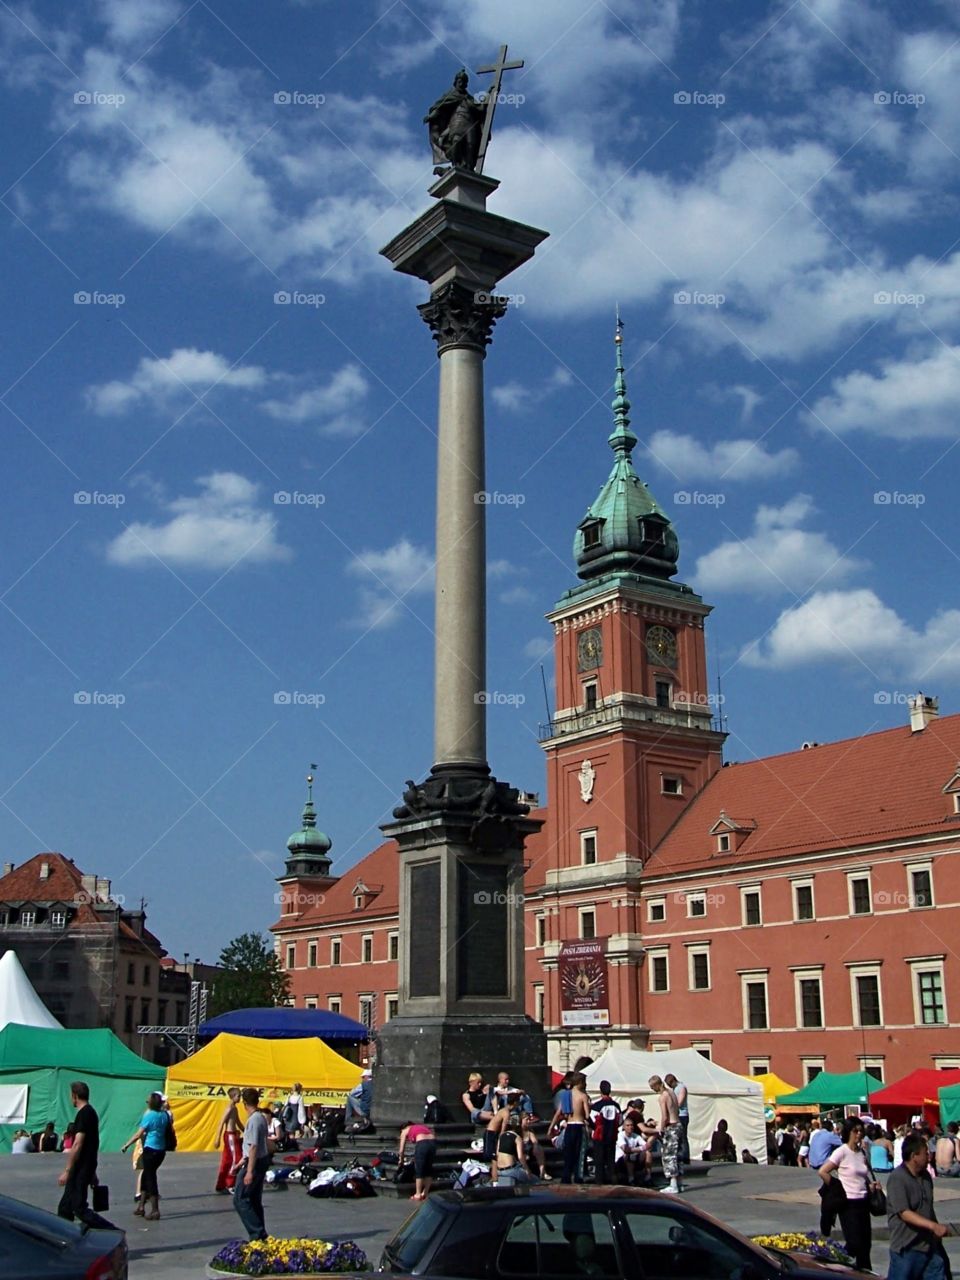 Students attending a fair on the grounds in front of the Royal Castle in Warsaw, Poland